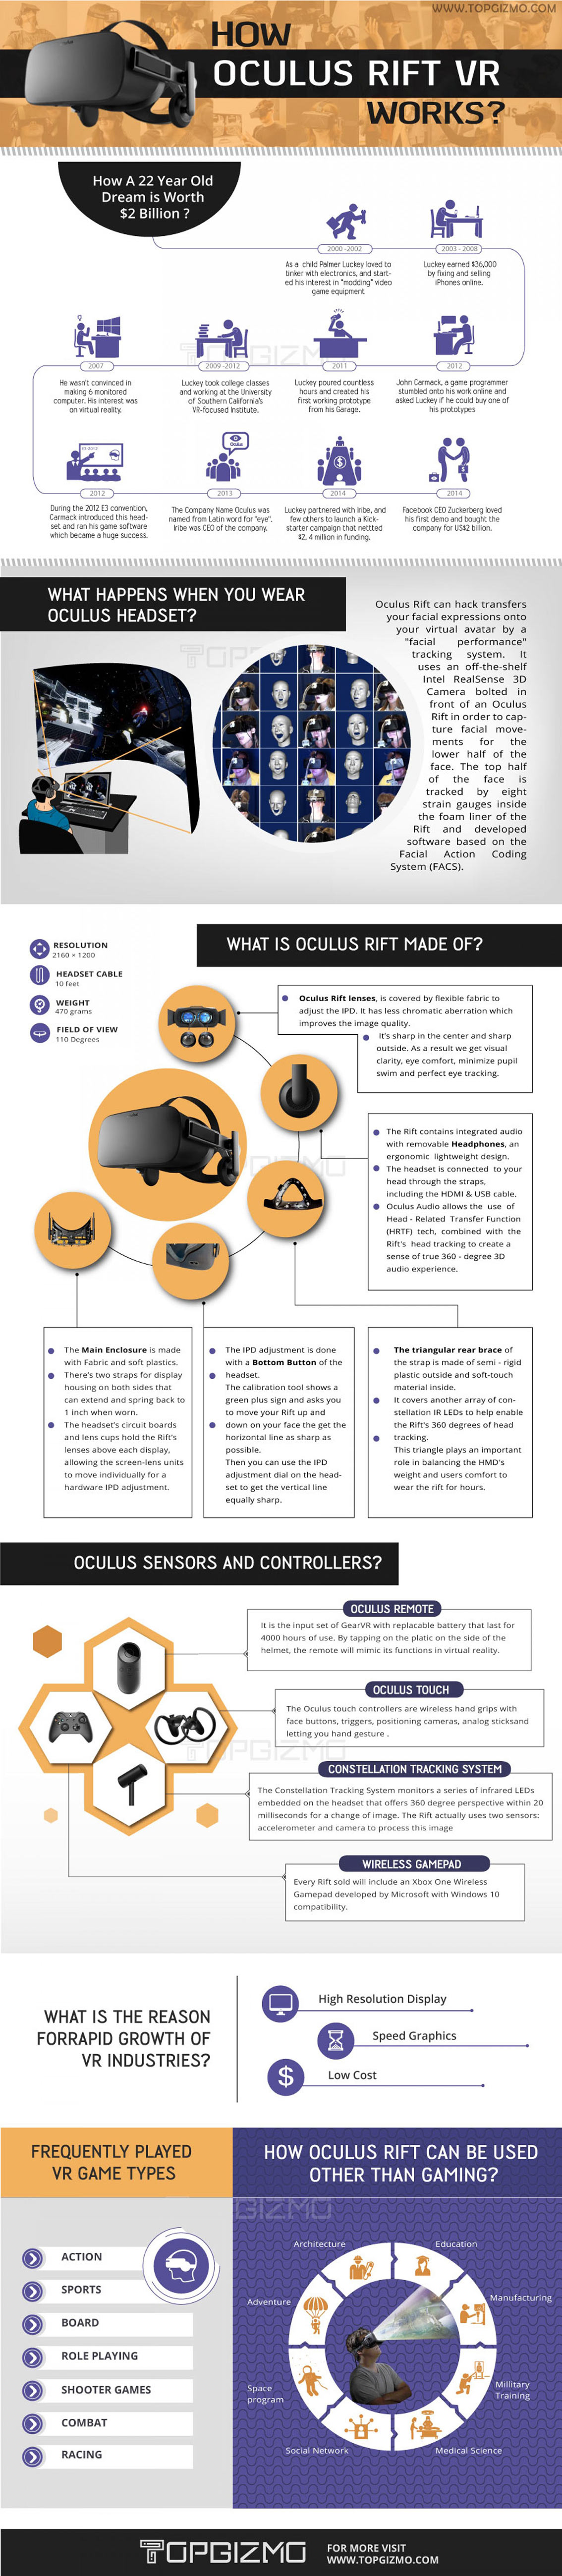 Oculus Rift How the Device Works Infographic